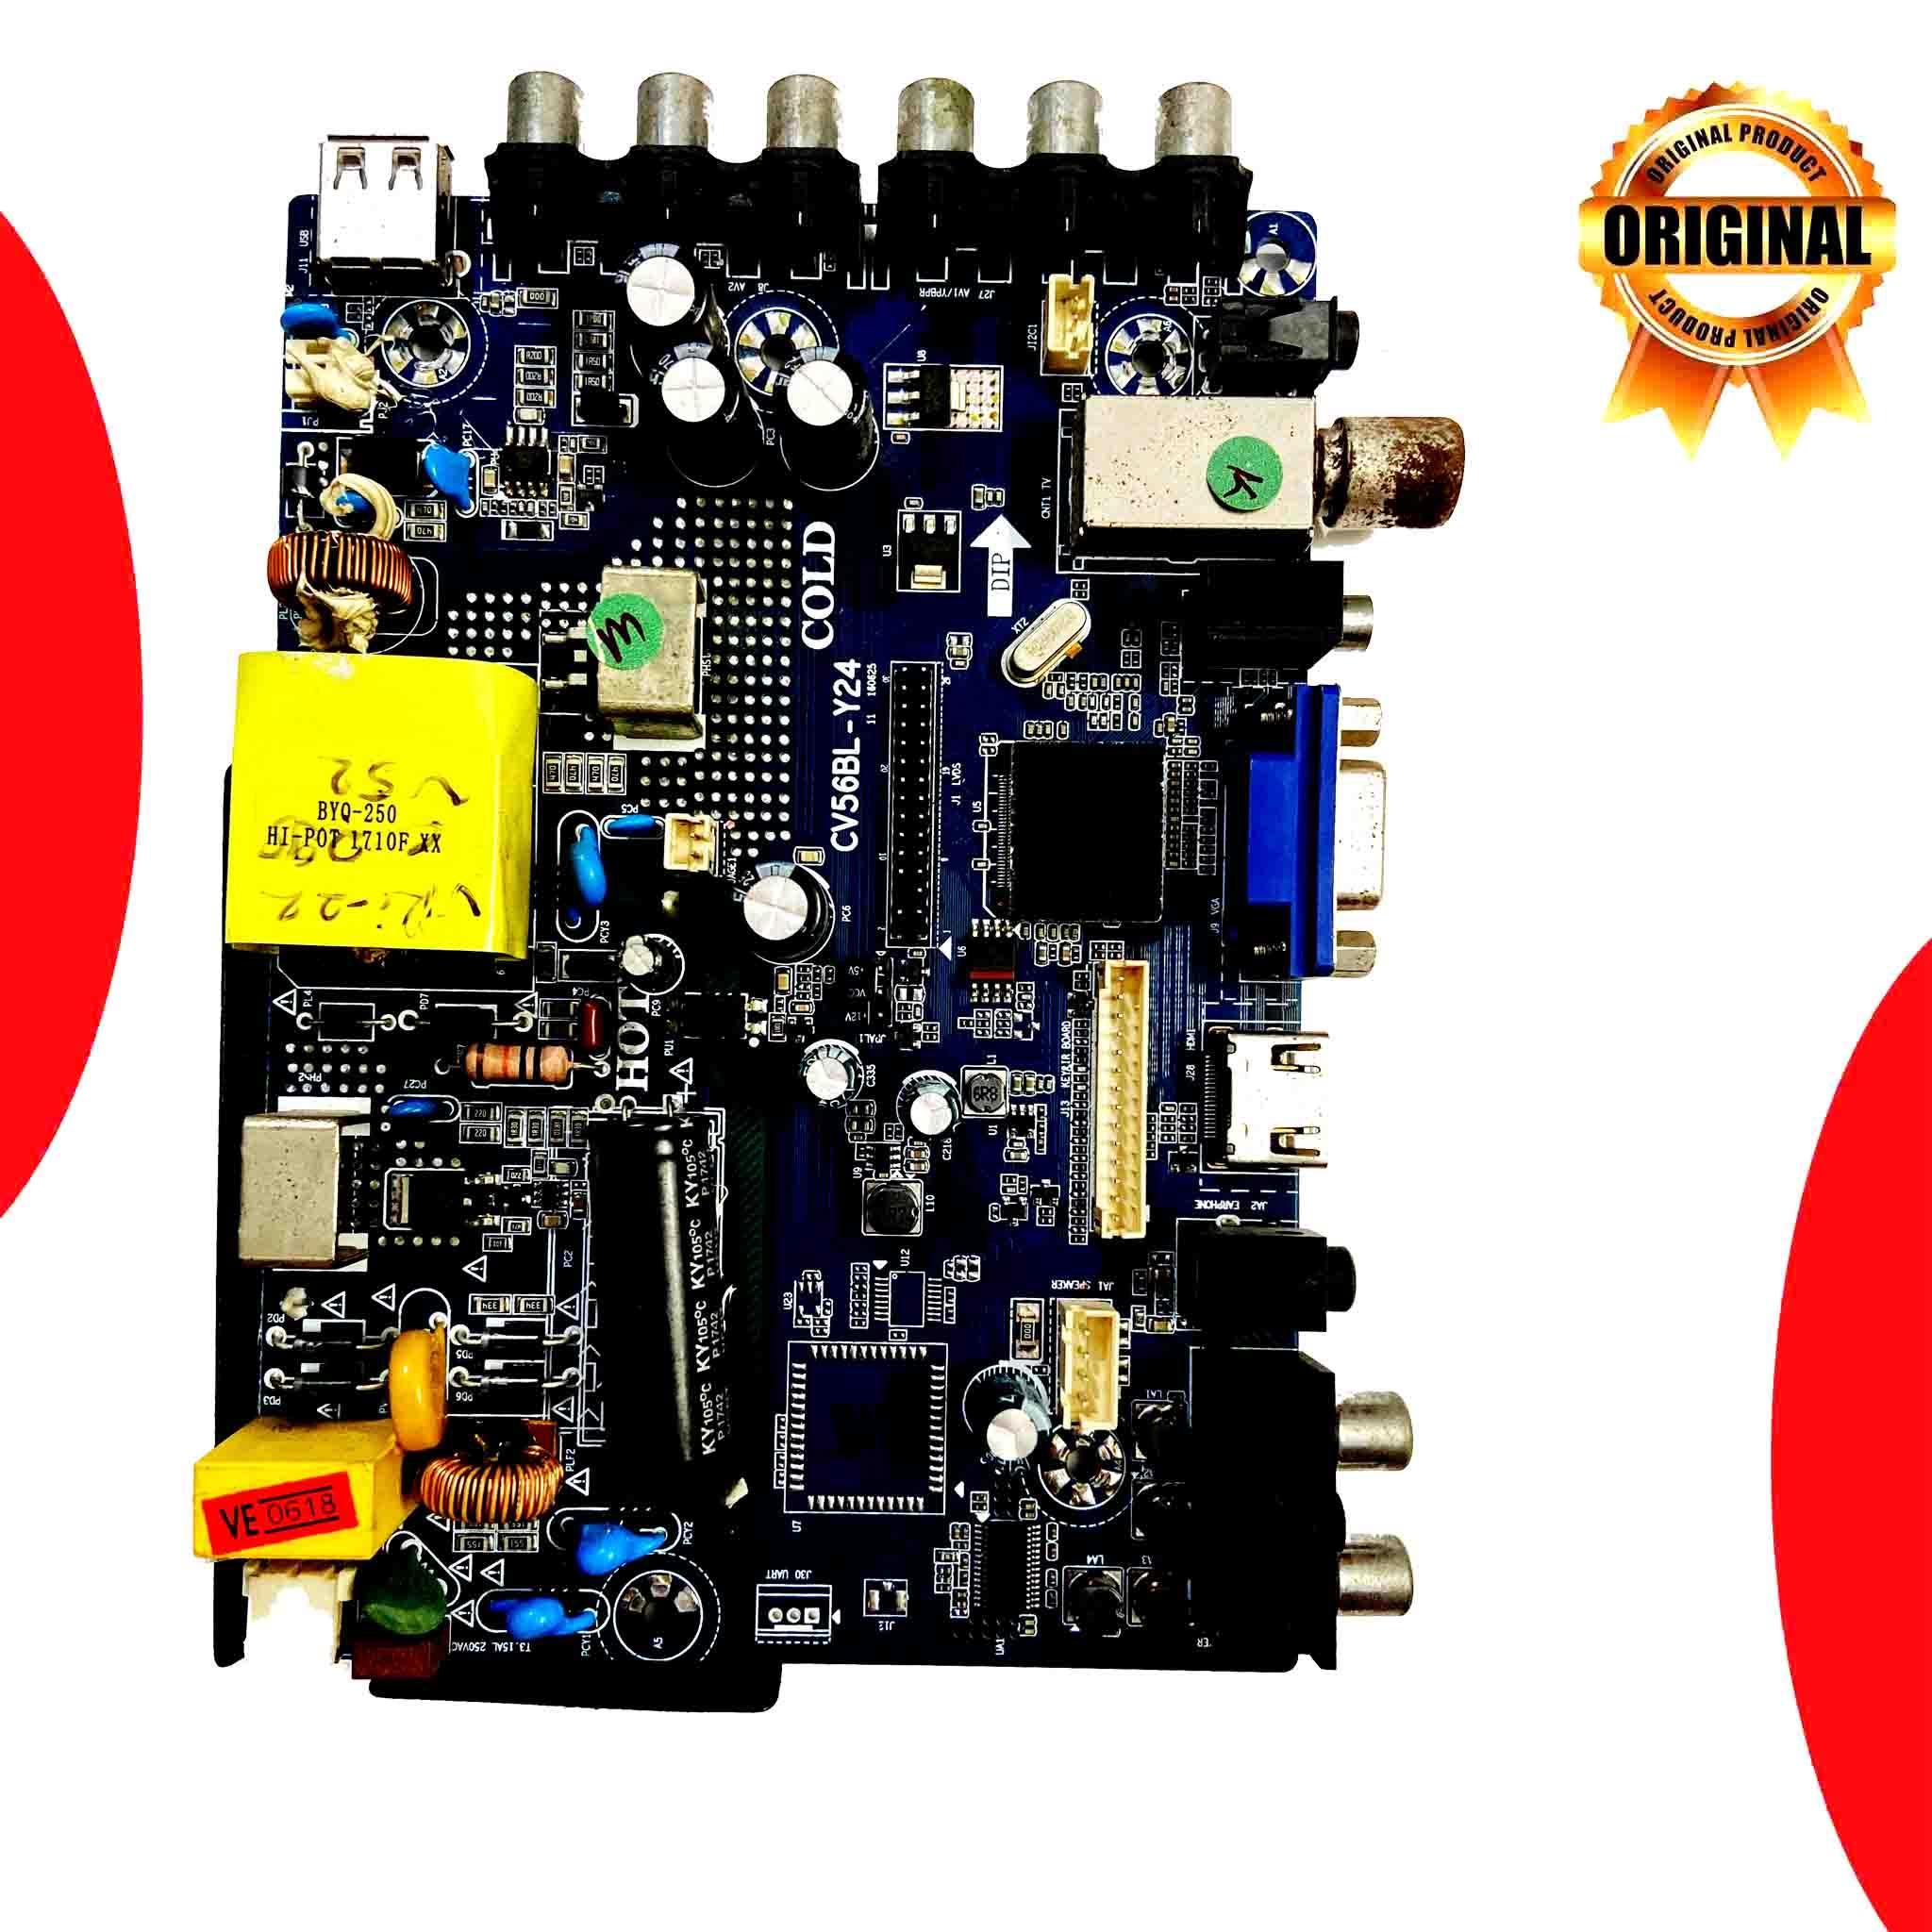 Croma 20 inch LED TV Motherboard for Model CREL7072 - Great Bharat Electronics